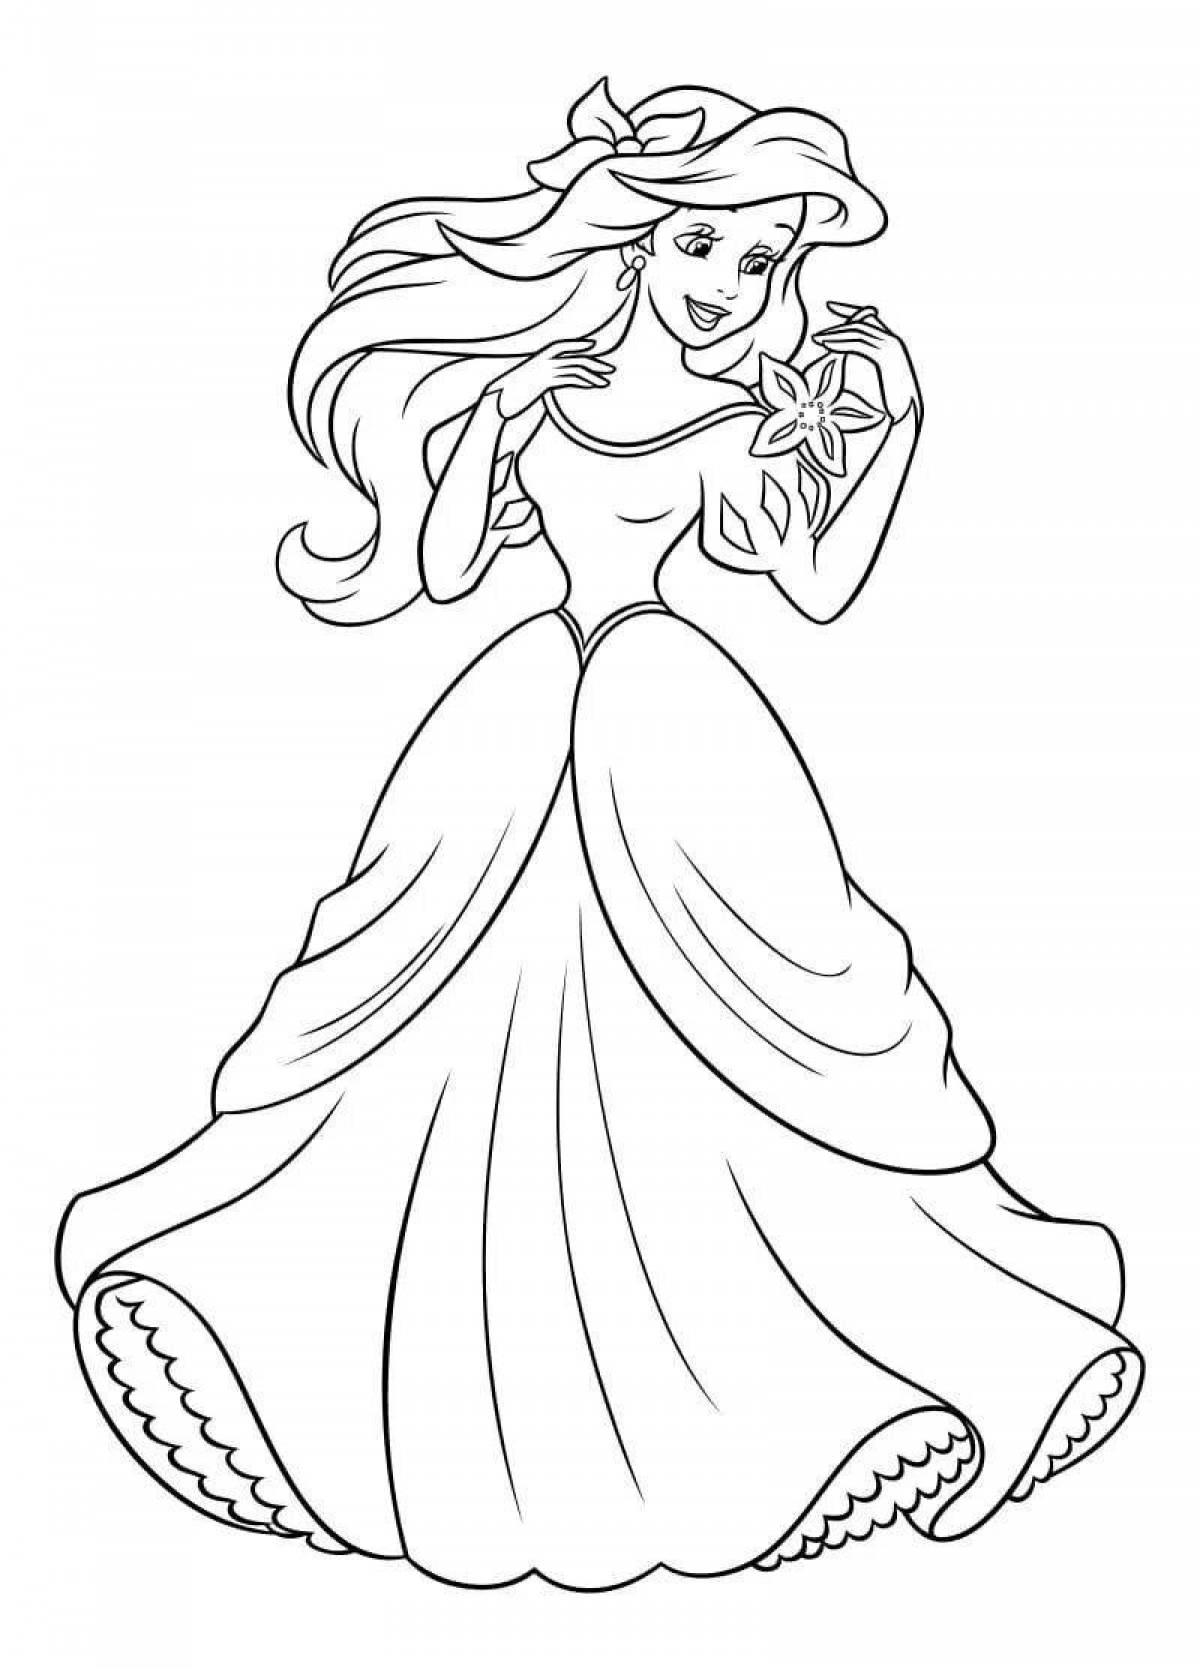 Gorgeous ariel the little mermaid coloring book for girls